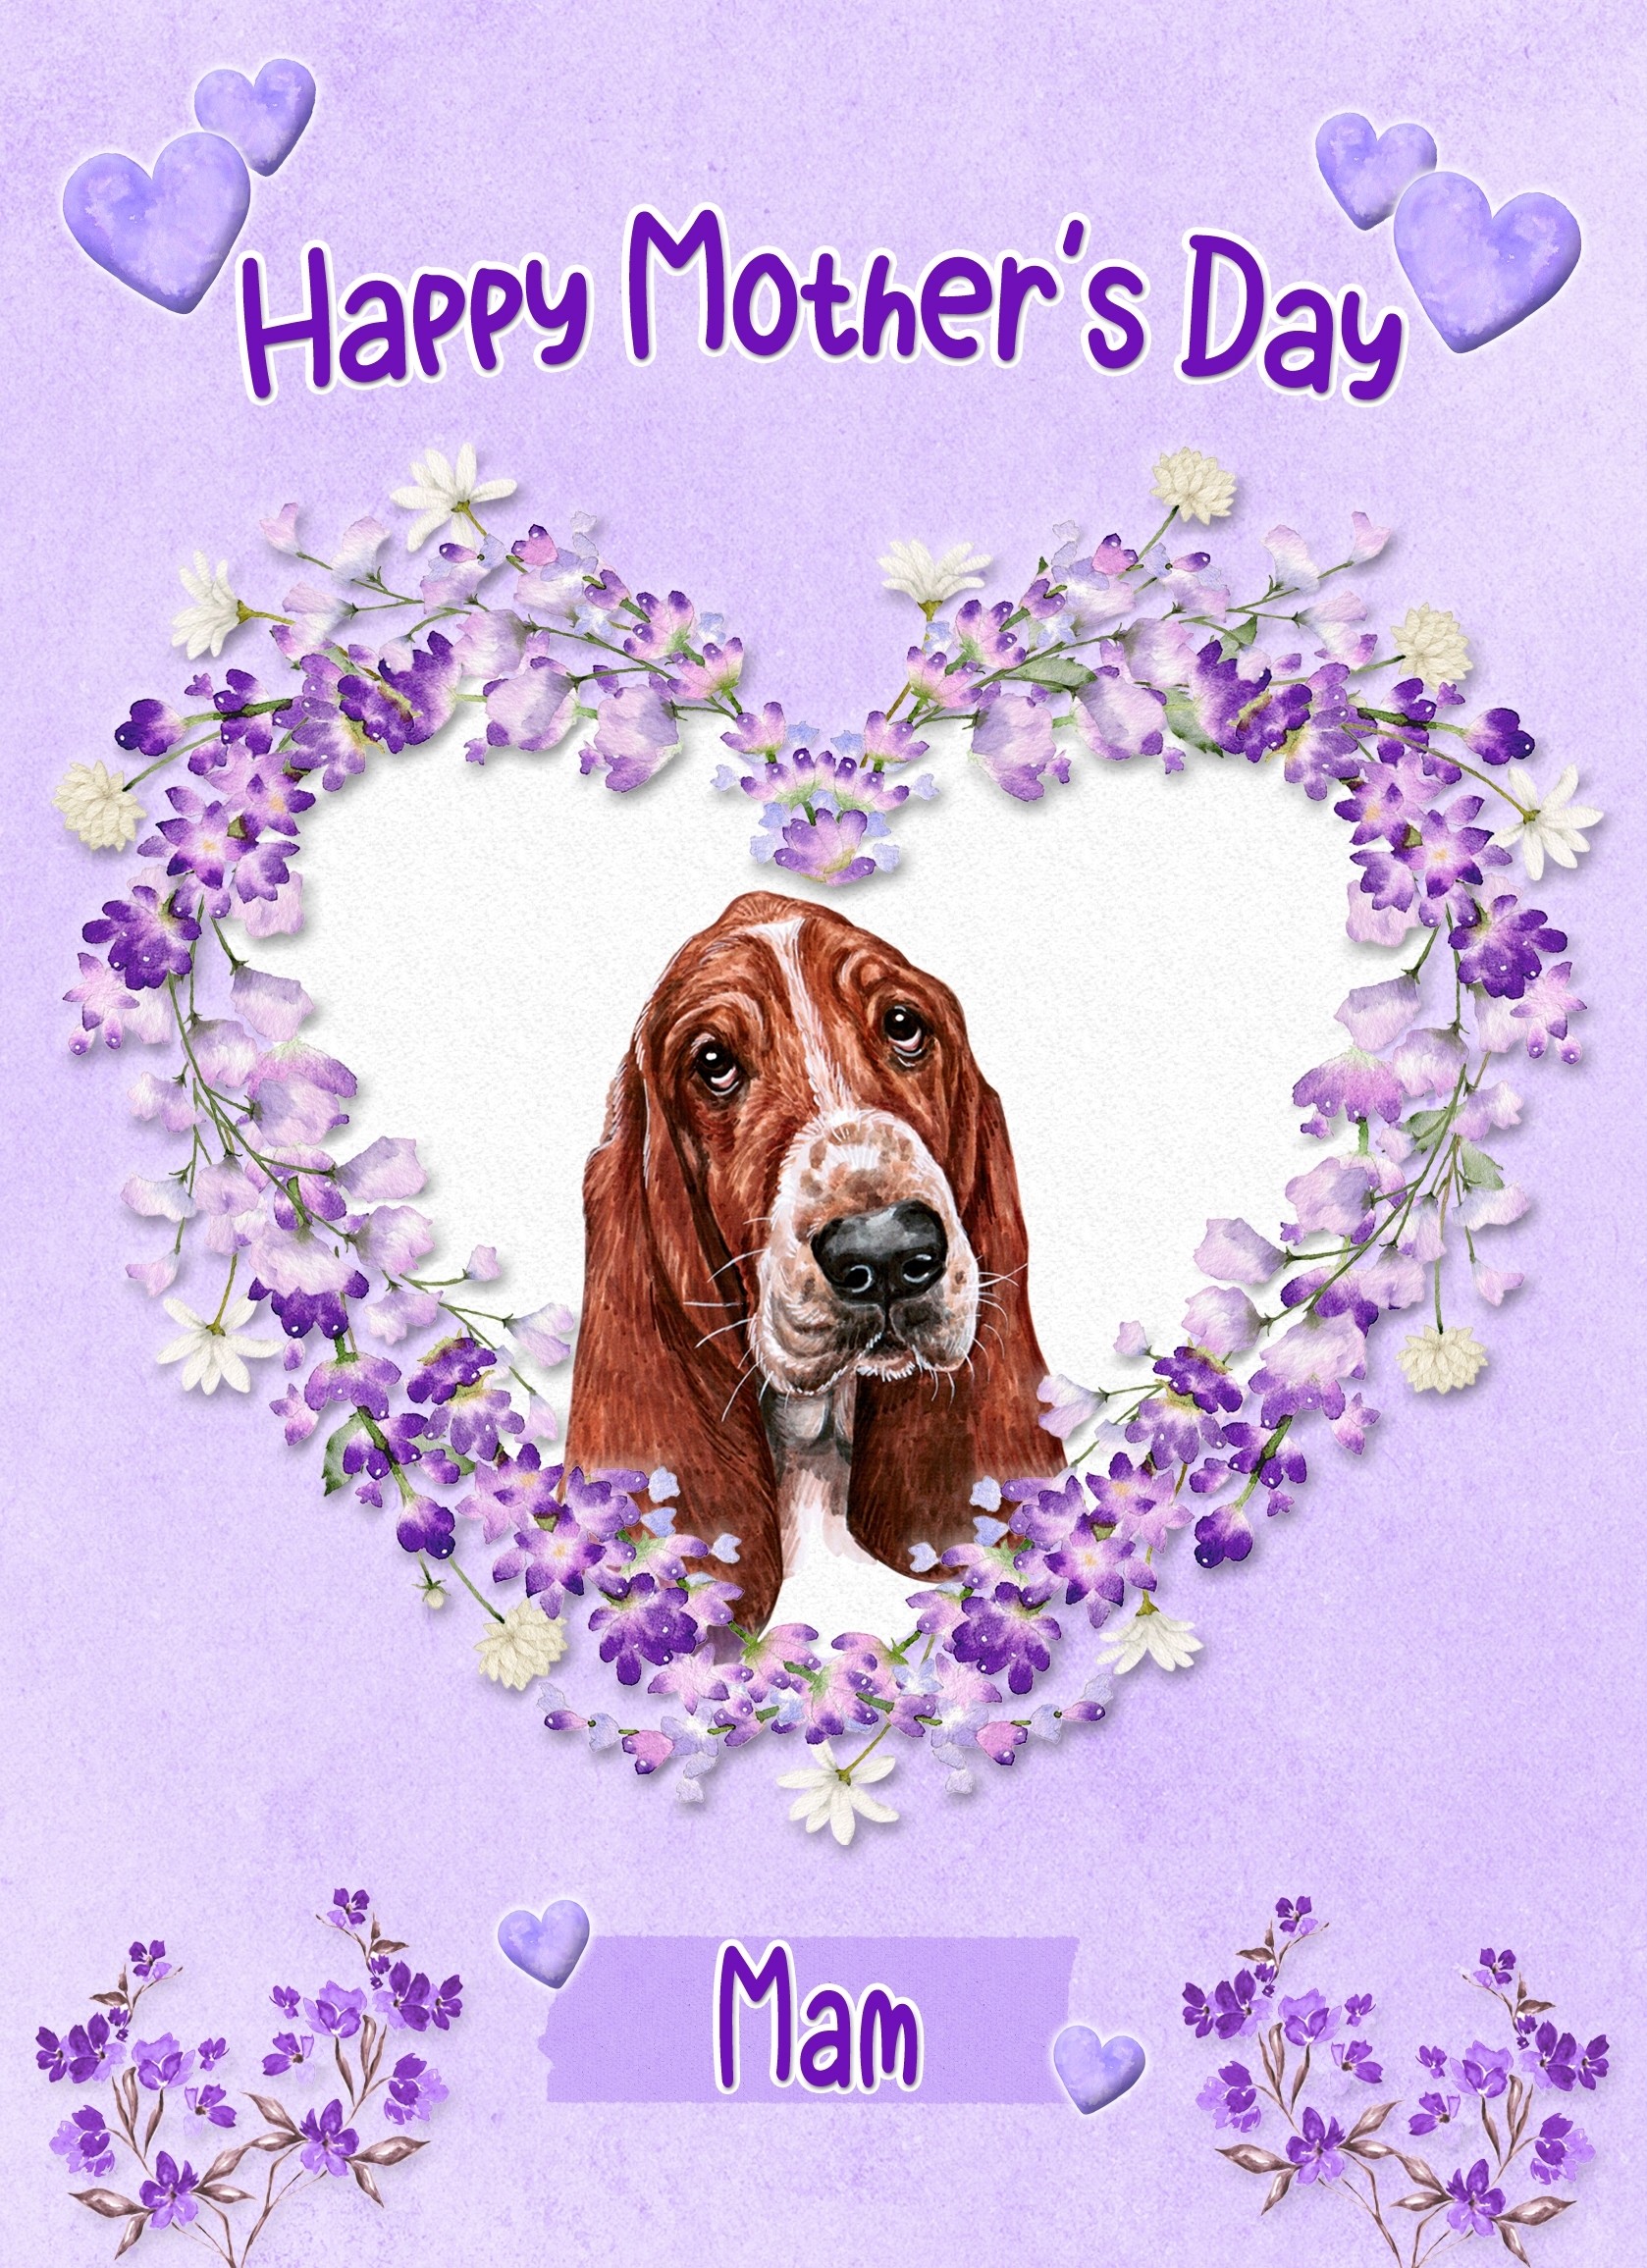 Basset Hound Dog Mothers Day Card (Happy Mothers, Mam)